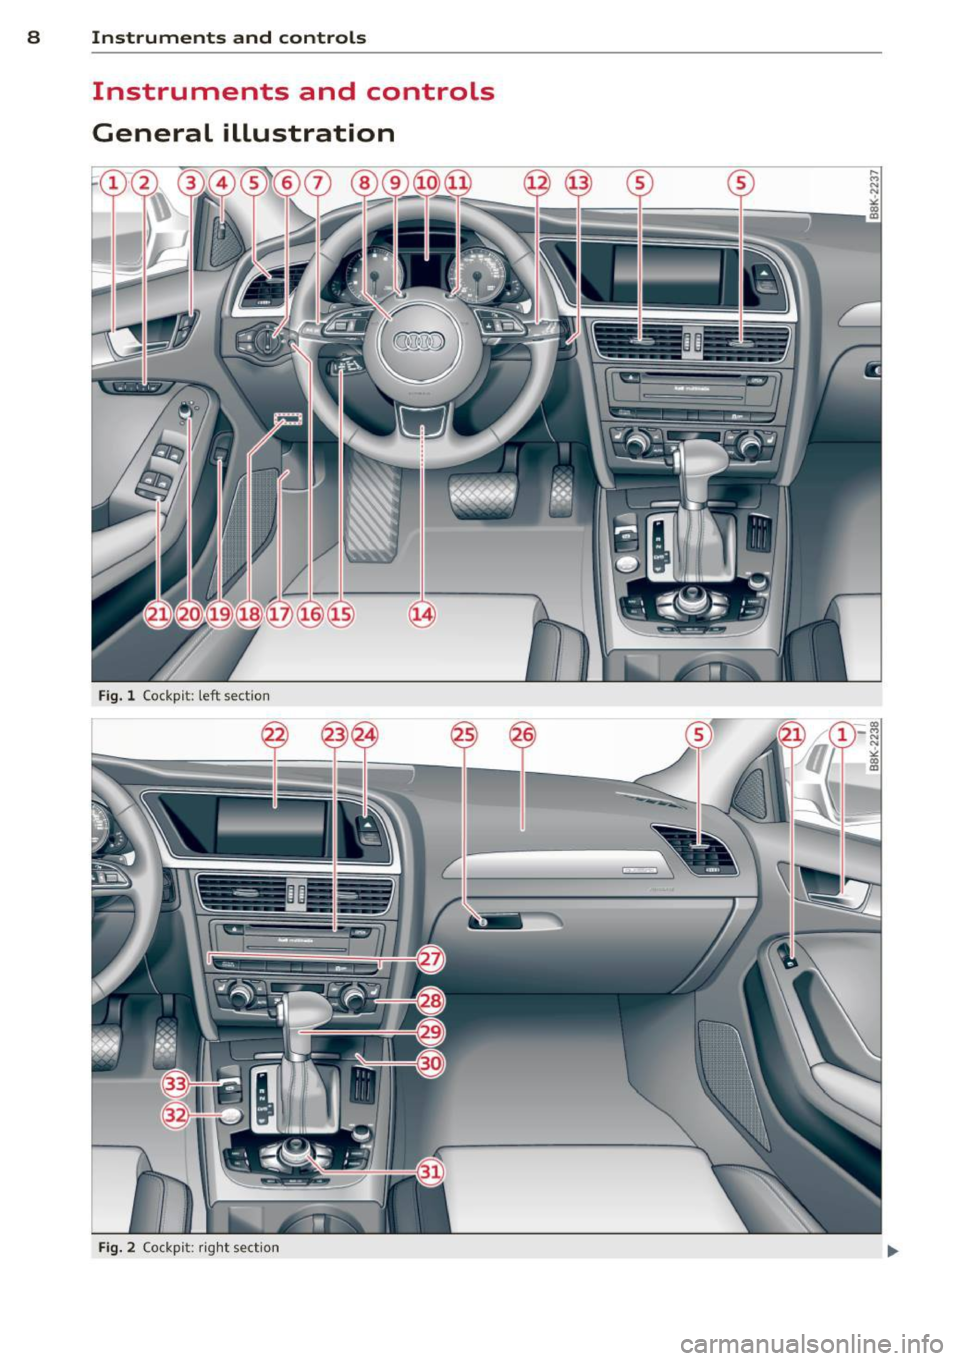 AUDI A4 2015  Owners Manual 8  Instruments and controls 
Instruments  and  controls 
General  illustration 
Fig. l Cockp it:  left  sect io n 
---=- ---1 =----- -
- --
- --
Fig. 2 Cock pi t: ri ght  sect io n  